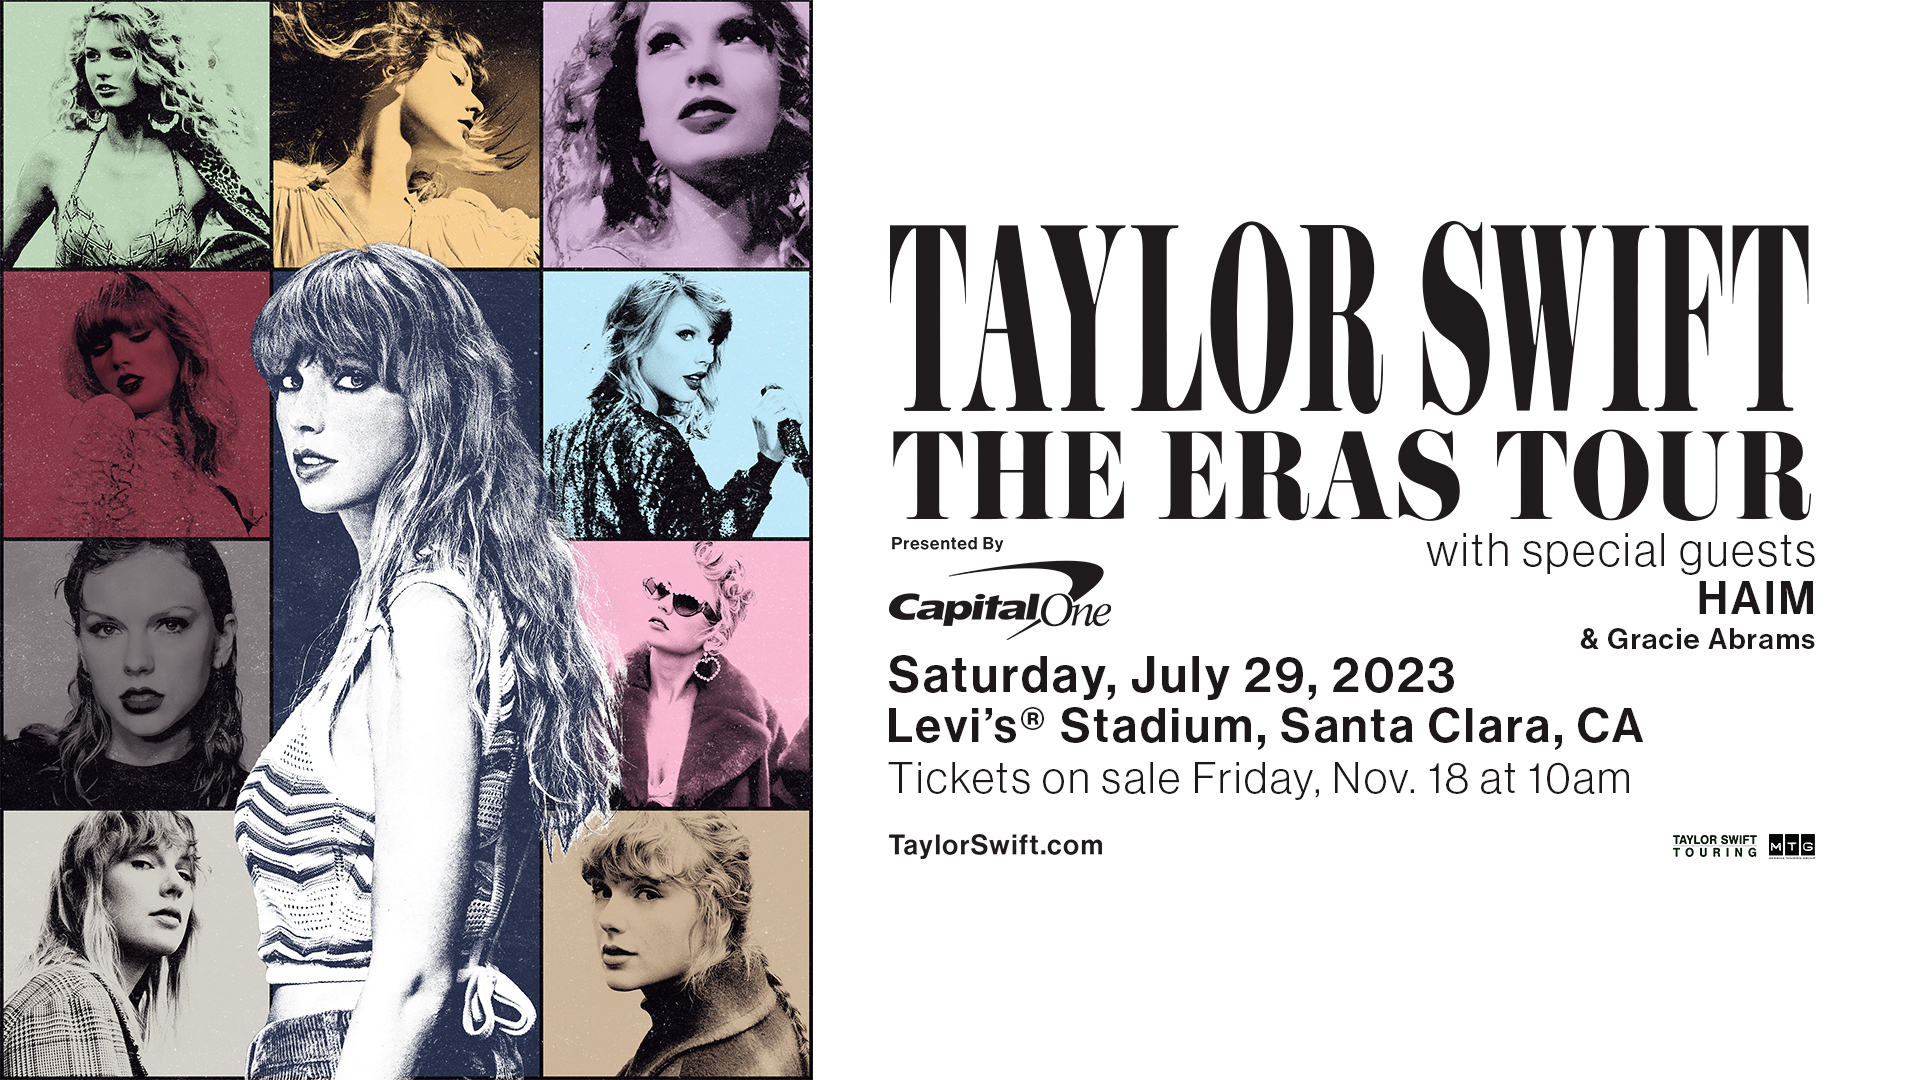 Get Ready for the Ultimate Taylor Swift Experience - Register Now for The Eras Tour! 19